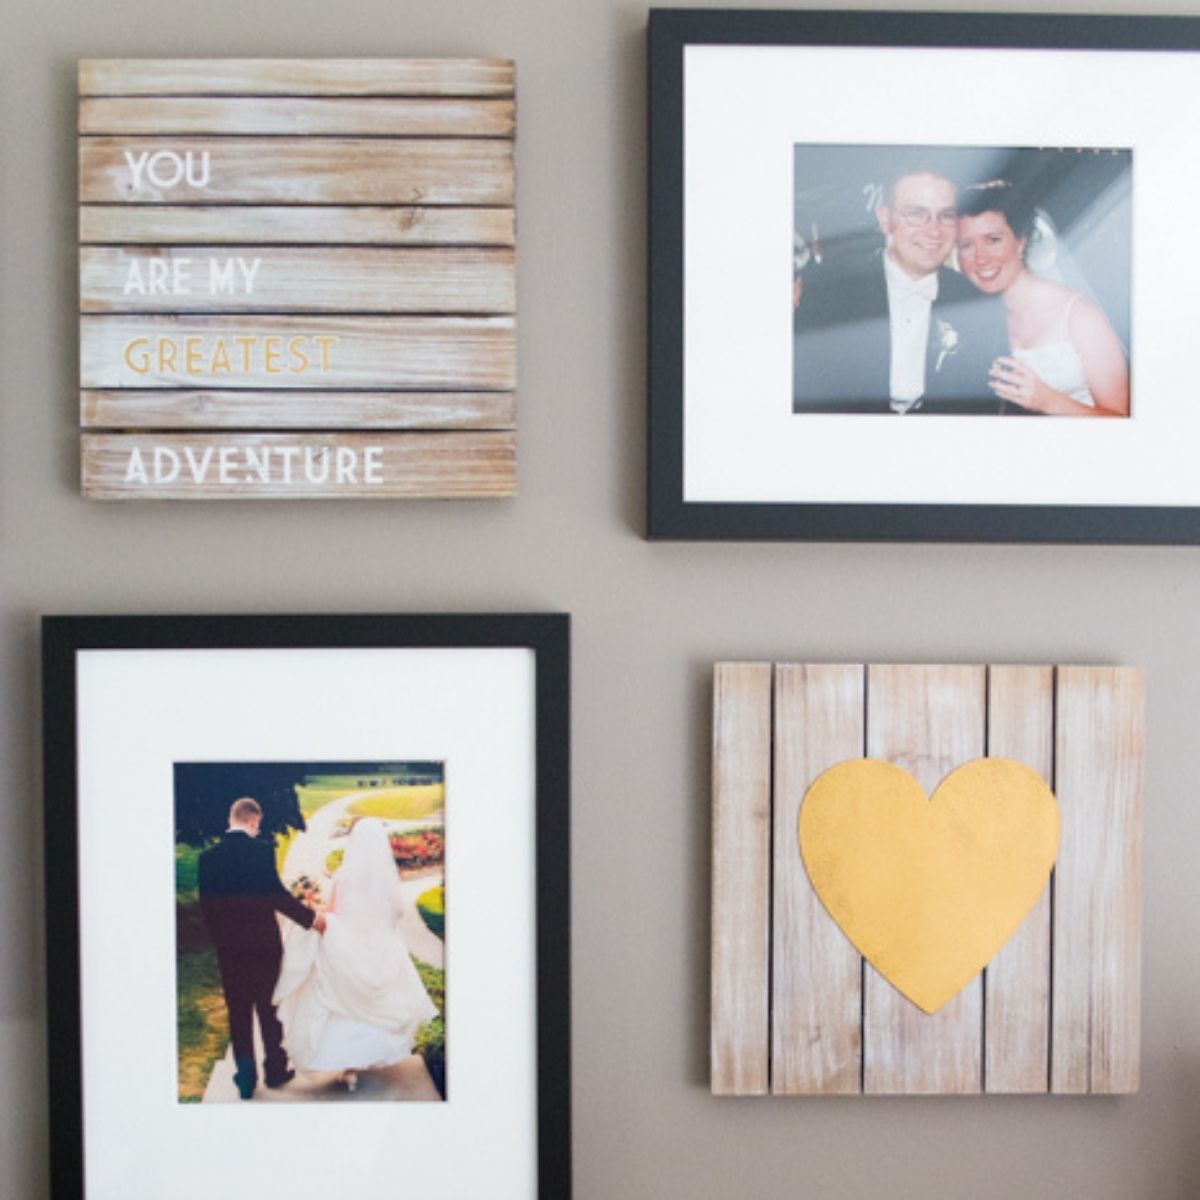 Wedding photos and wooden art featuring romantic quotes and a golden heart.